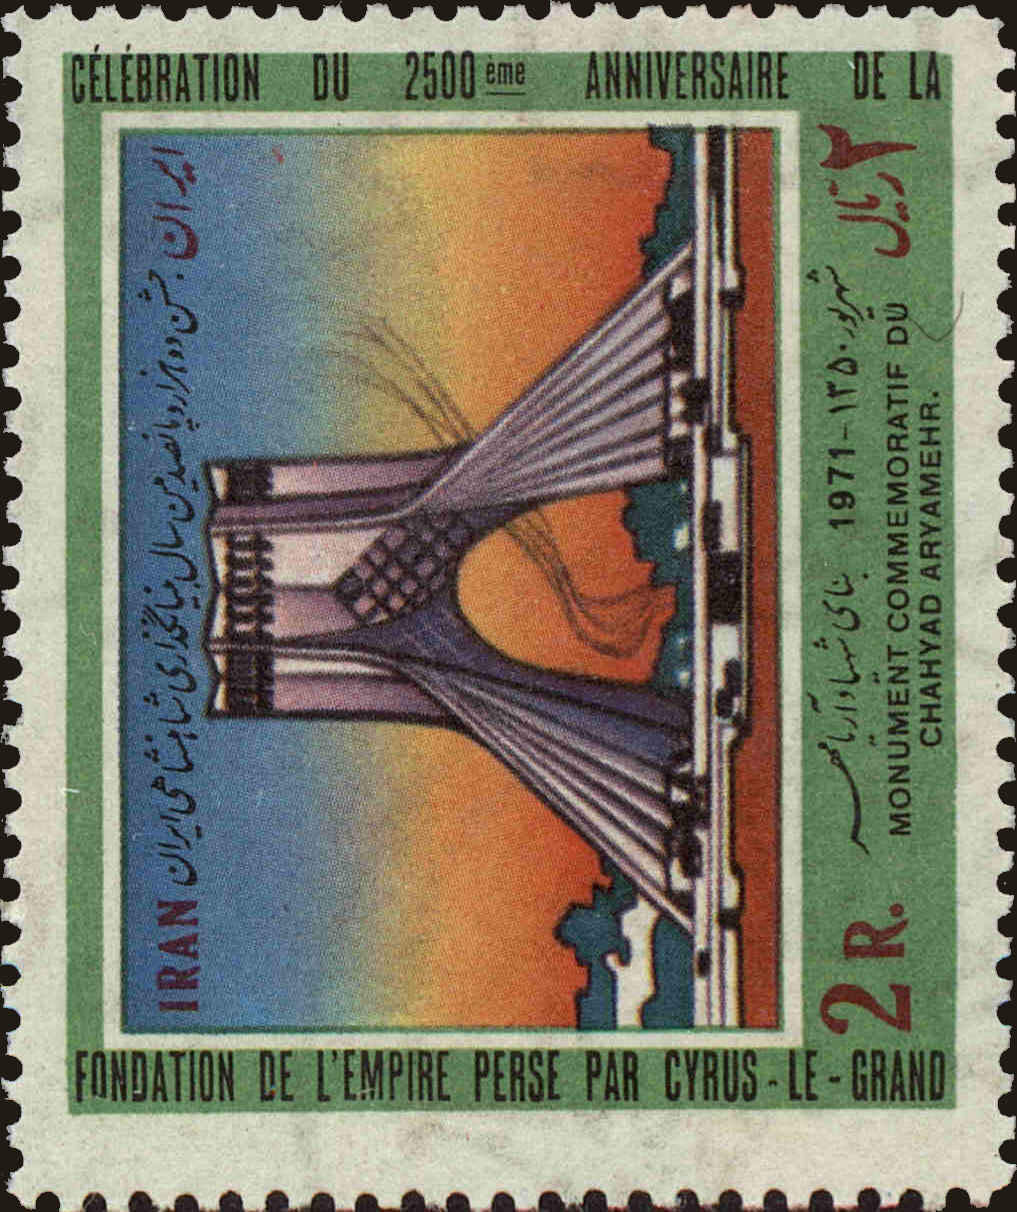 Front view of Iran 1606 collectors stamp